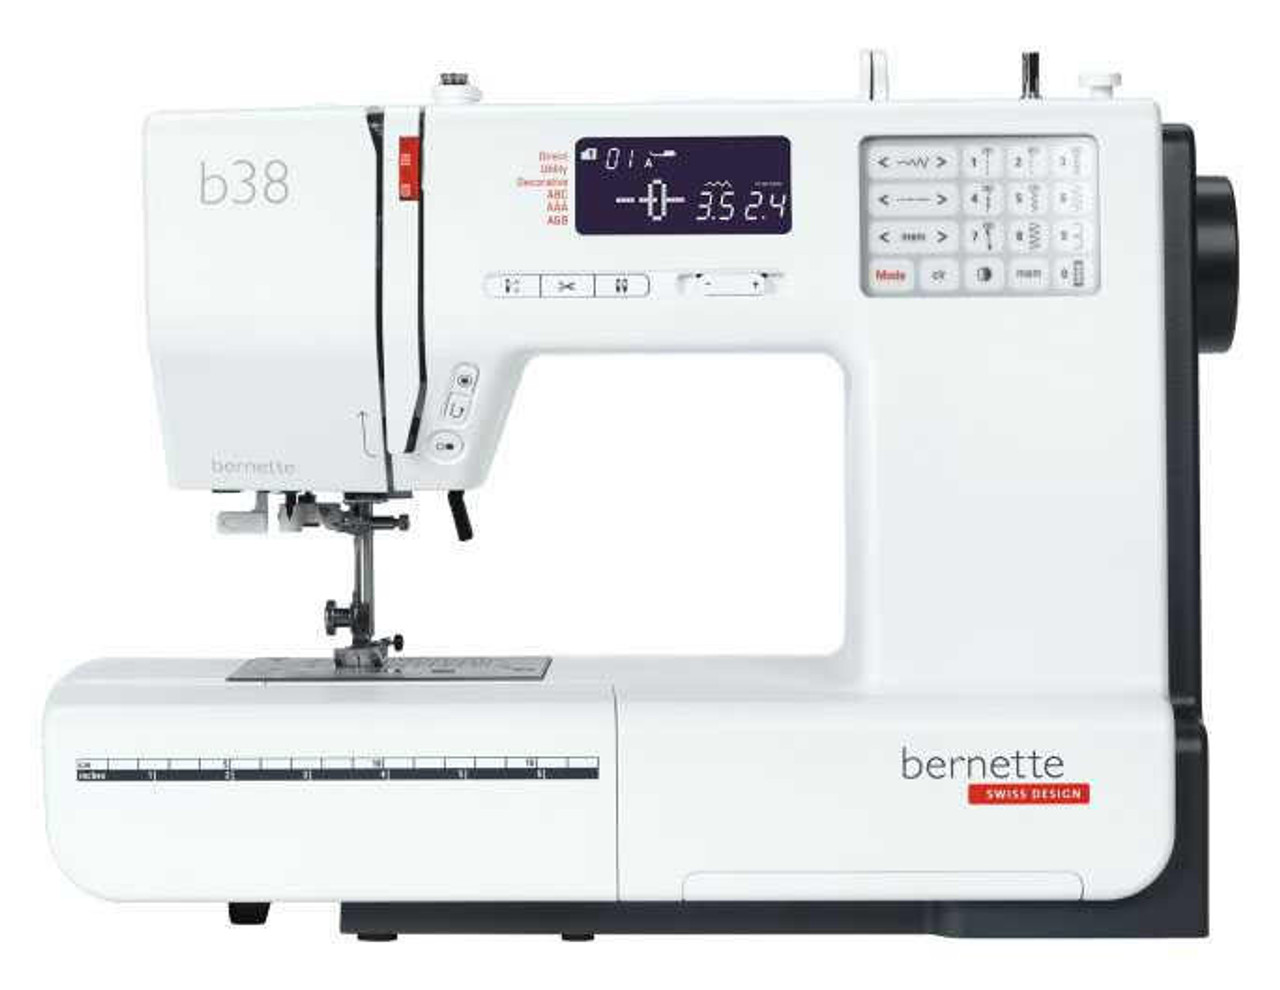 bernette - swiss design sewing machines, overlockers and sergers.